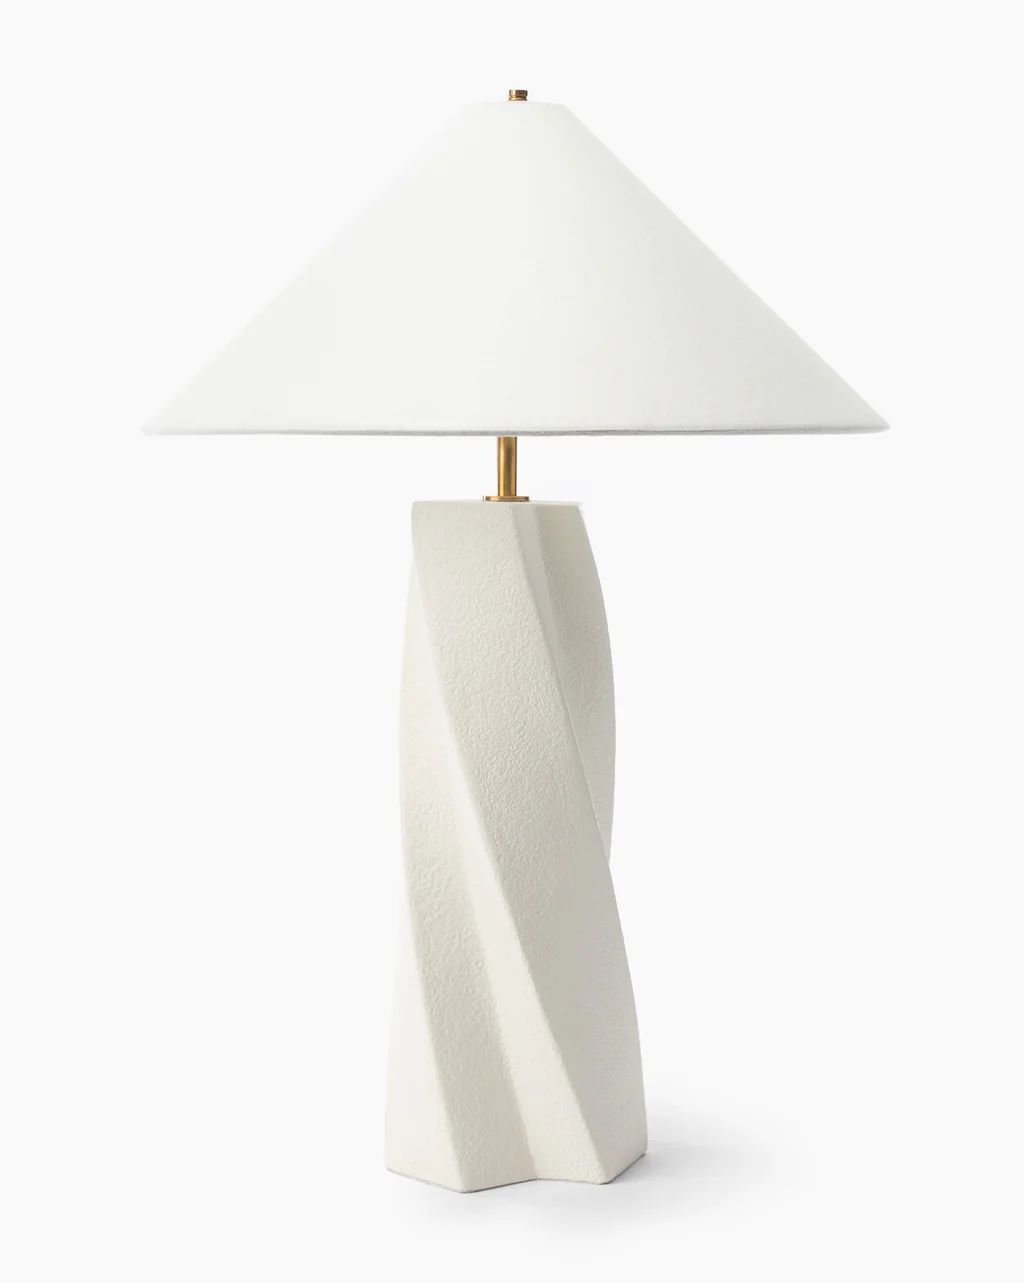 Bettencourt Table Lamp | McGee & Co.